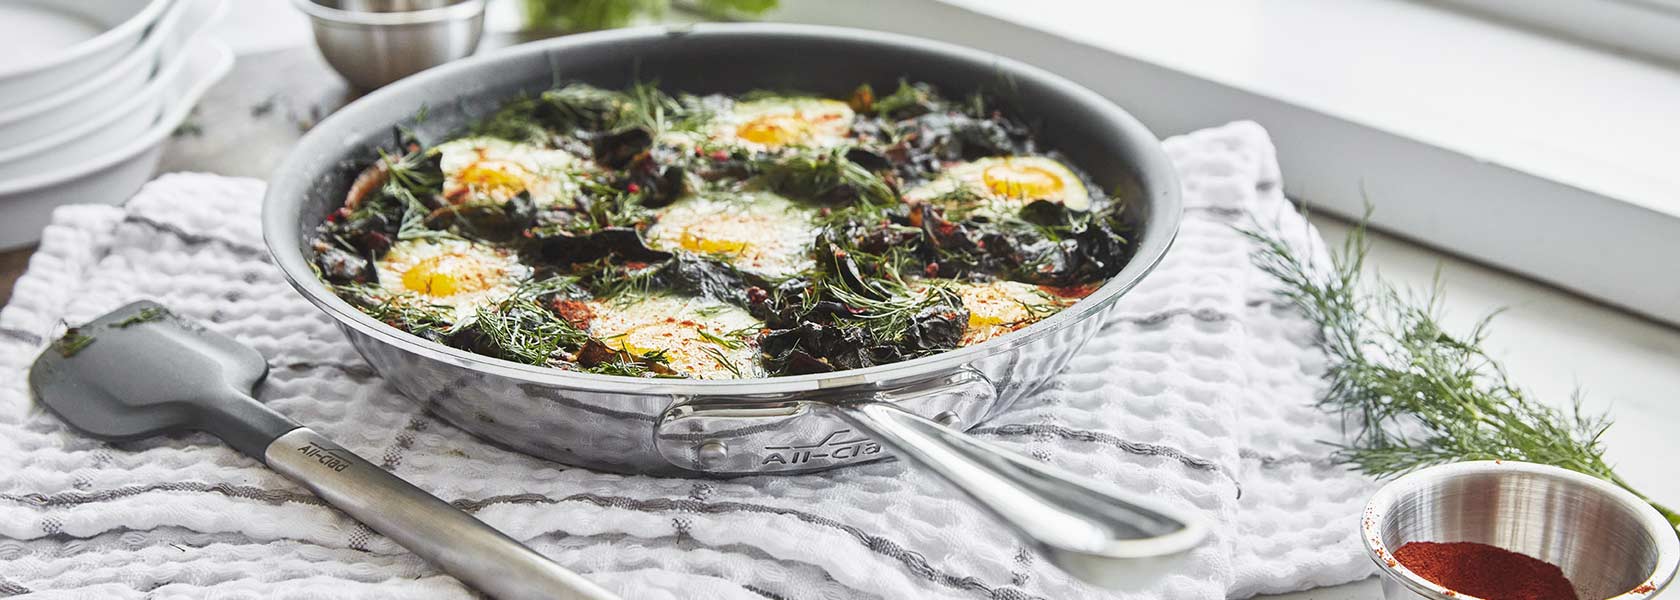 All-Clad stainless steel skillet with green shakshuka